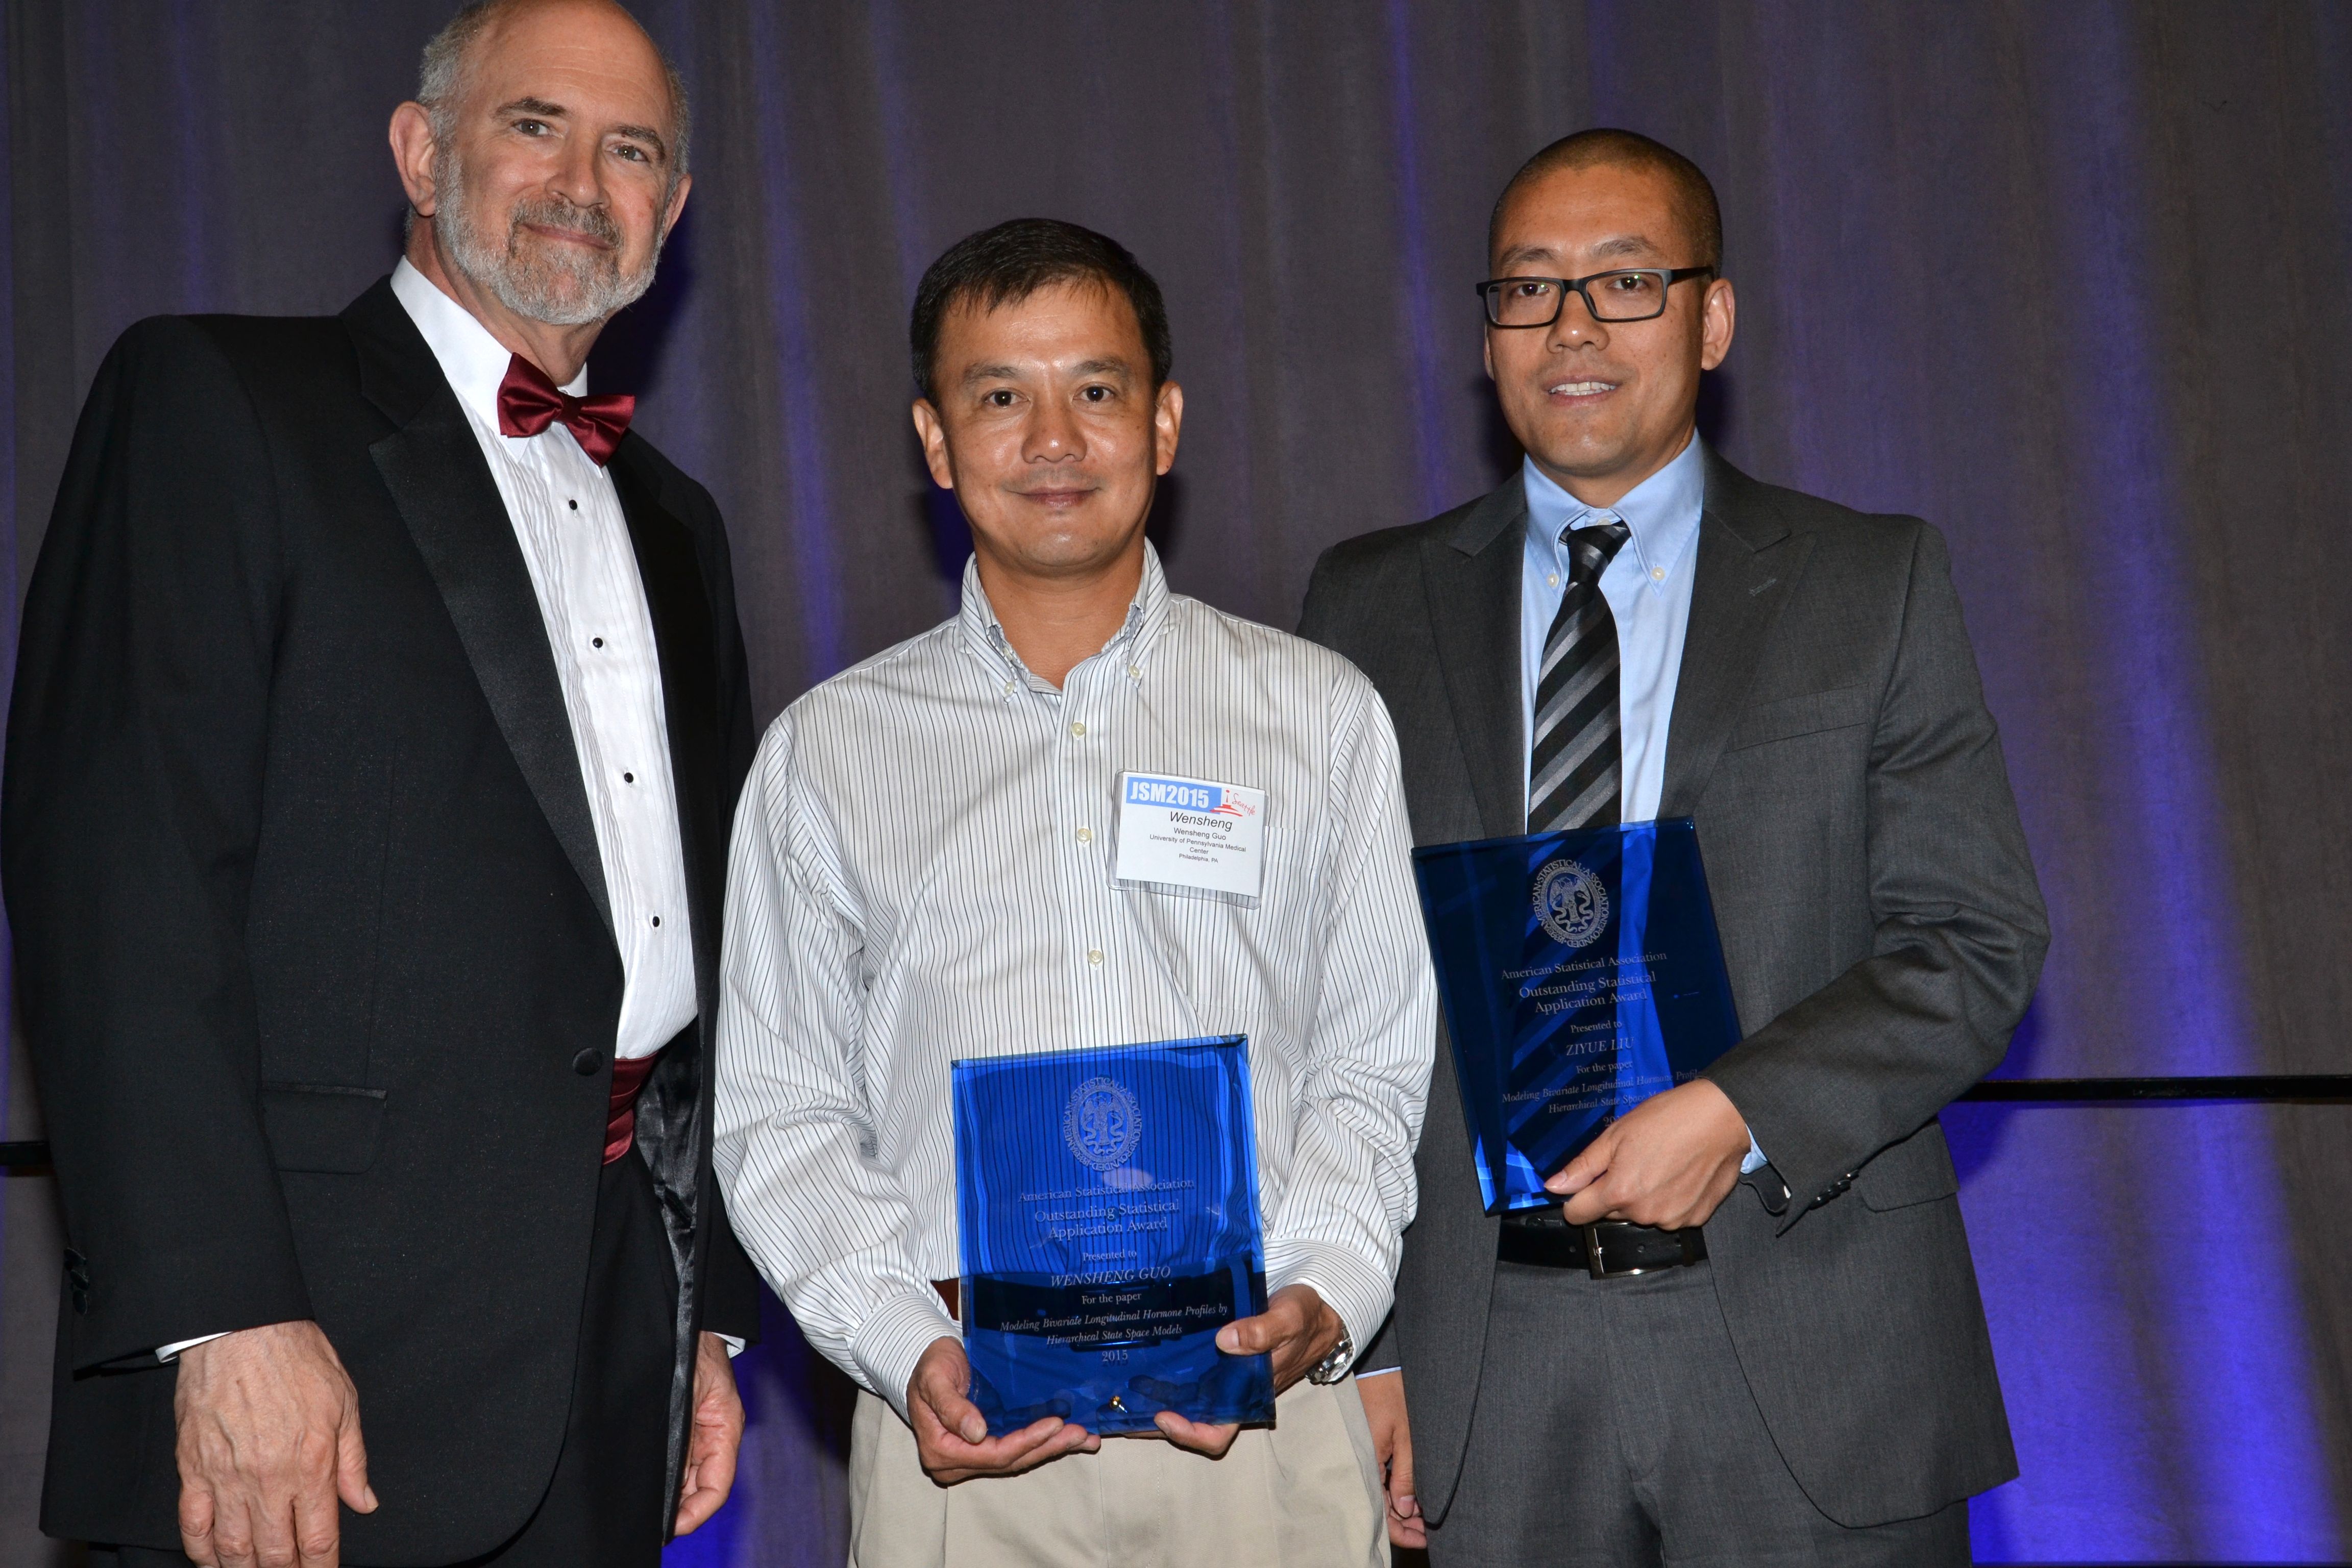 ASA President David Morganstein presents the Award of Outstanding Statistical Application to Wensheng Guo of the University of Pennsylvania and Ziyue Liu of Indiana University.